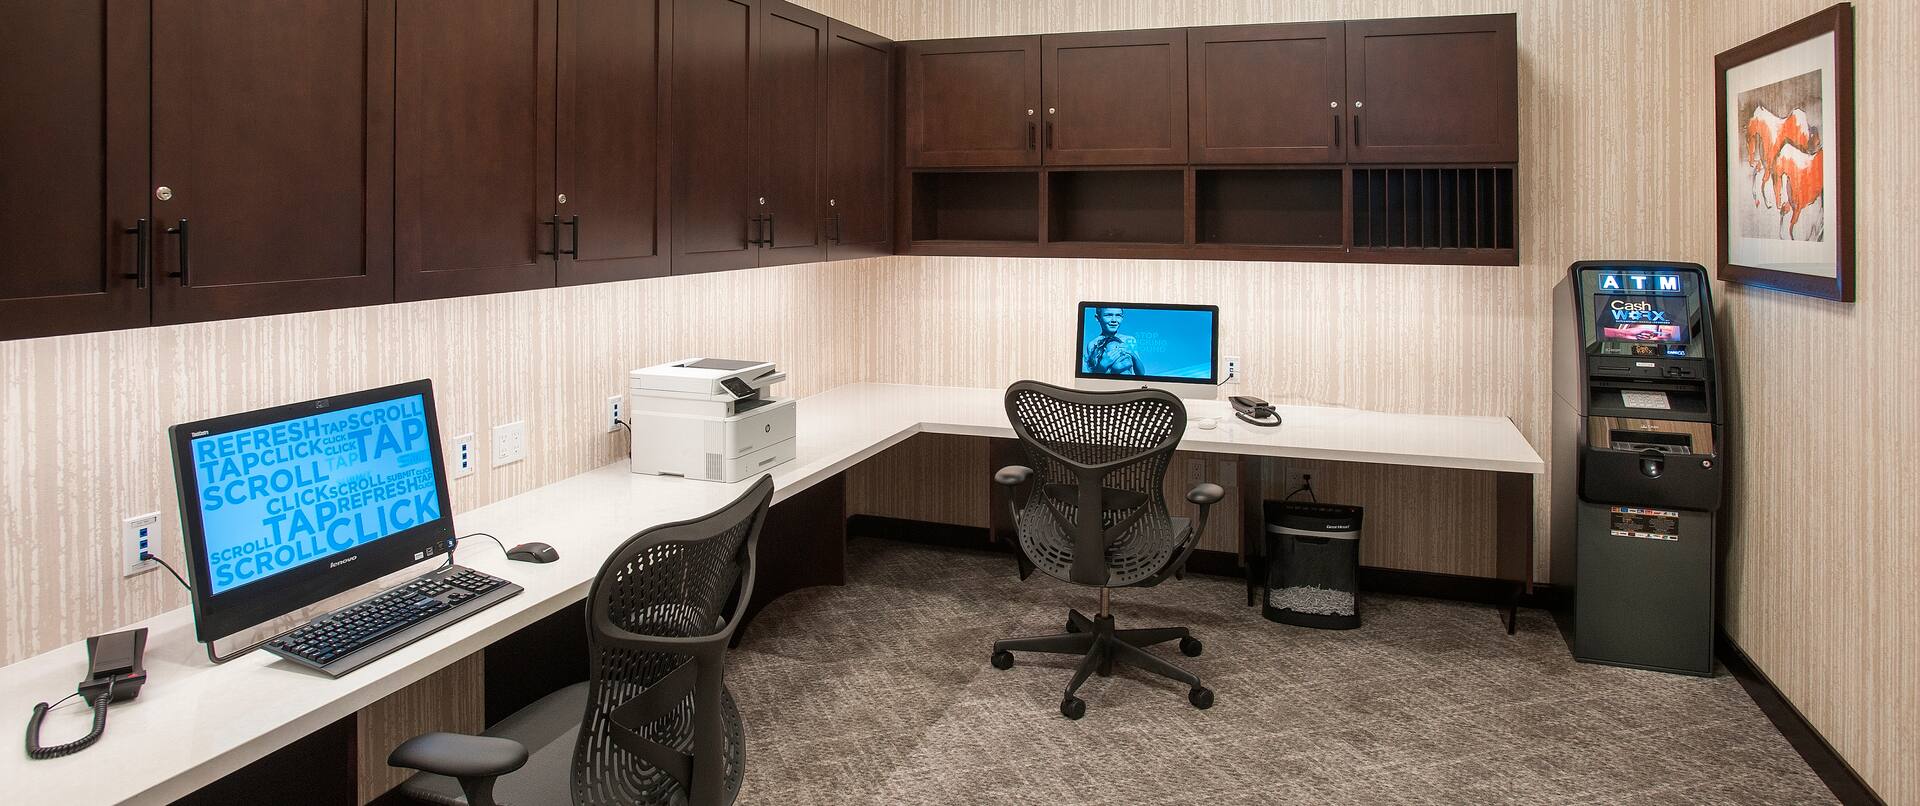 Business Center With Overhead Cabinets, Two Computer Workstations, Ergonomic Chairs, Printer/Fax/Copier, and ATM Machine in corner by Wall Art